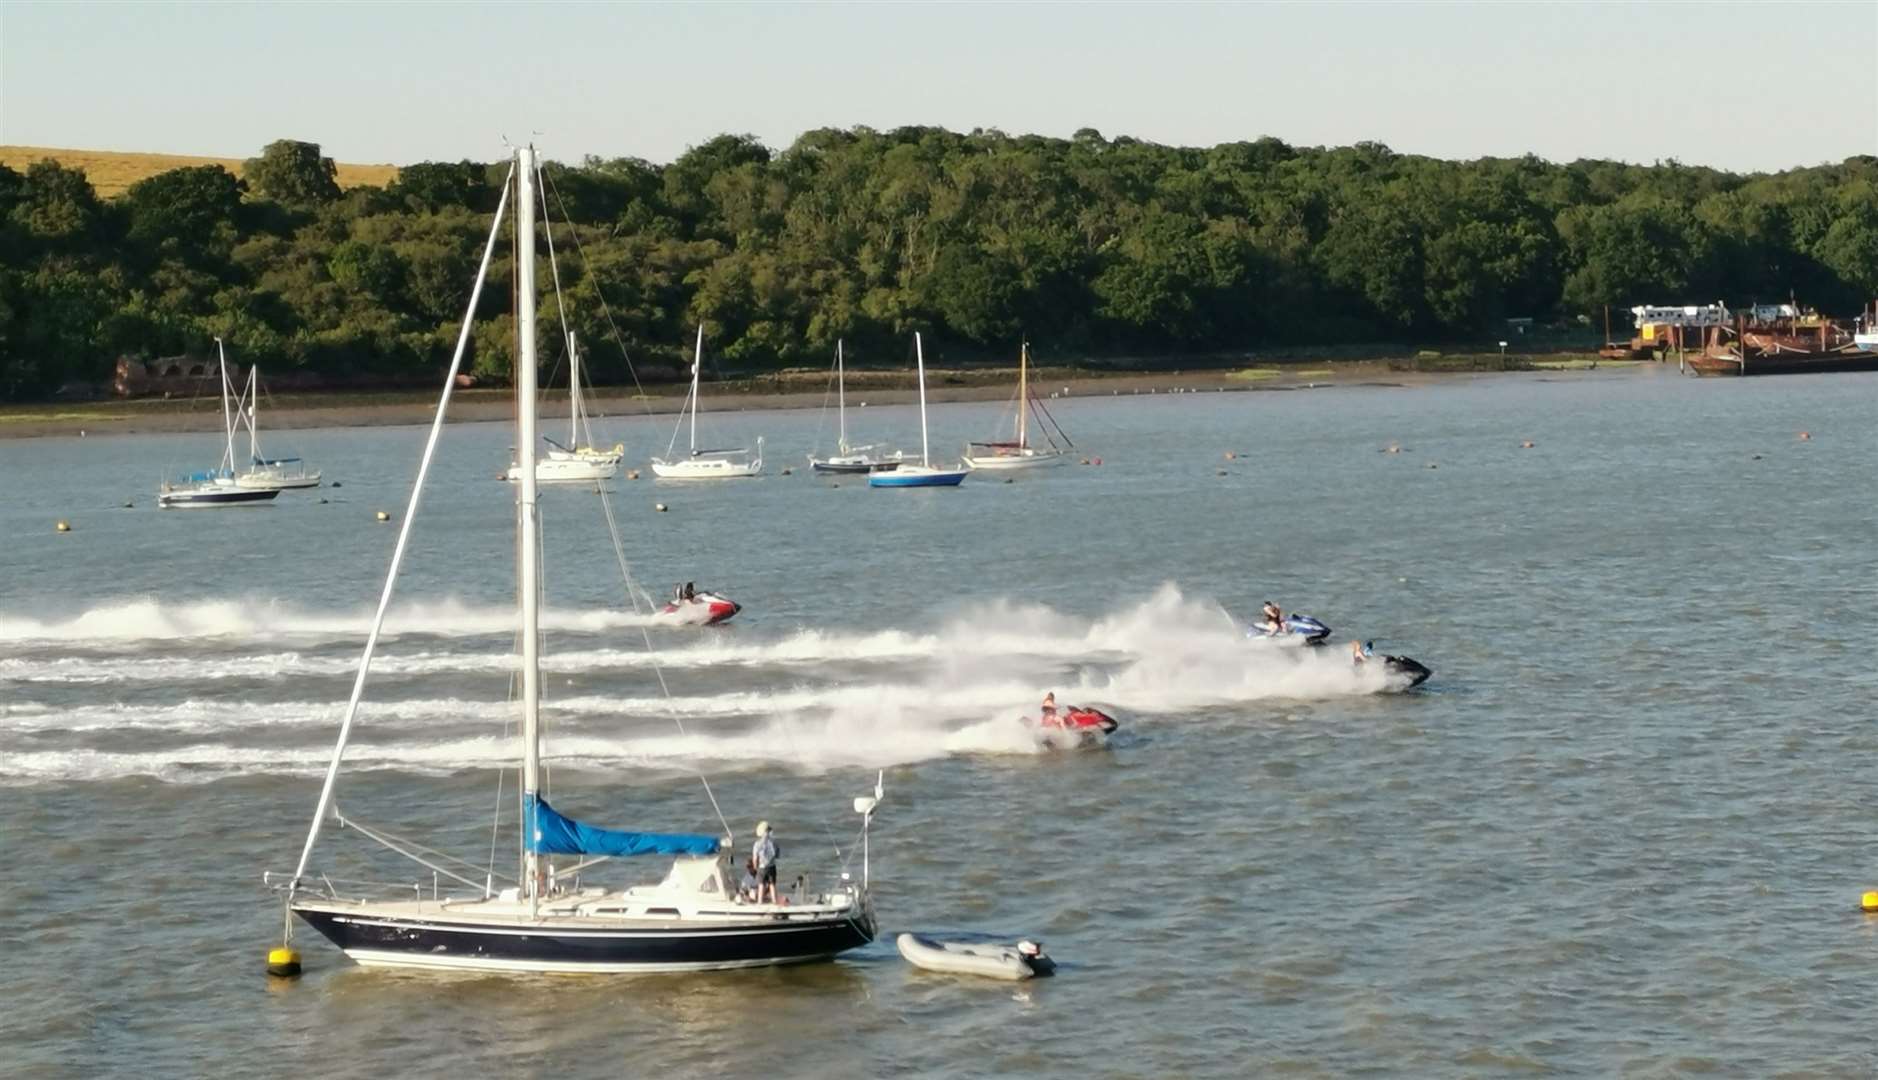 Photo of jet skiers speeding past moored boats on the River Medway